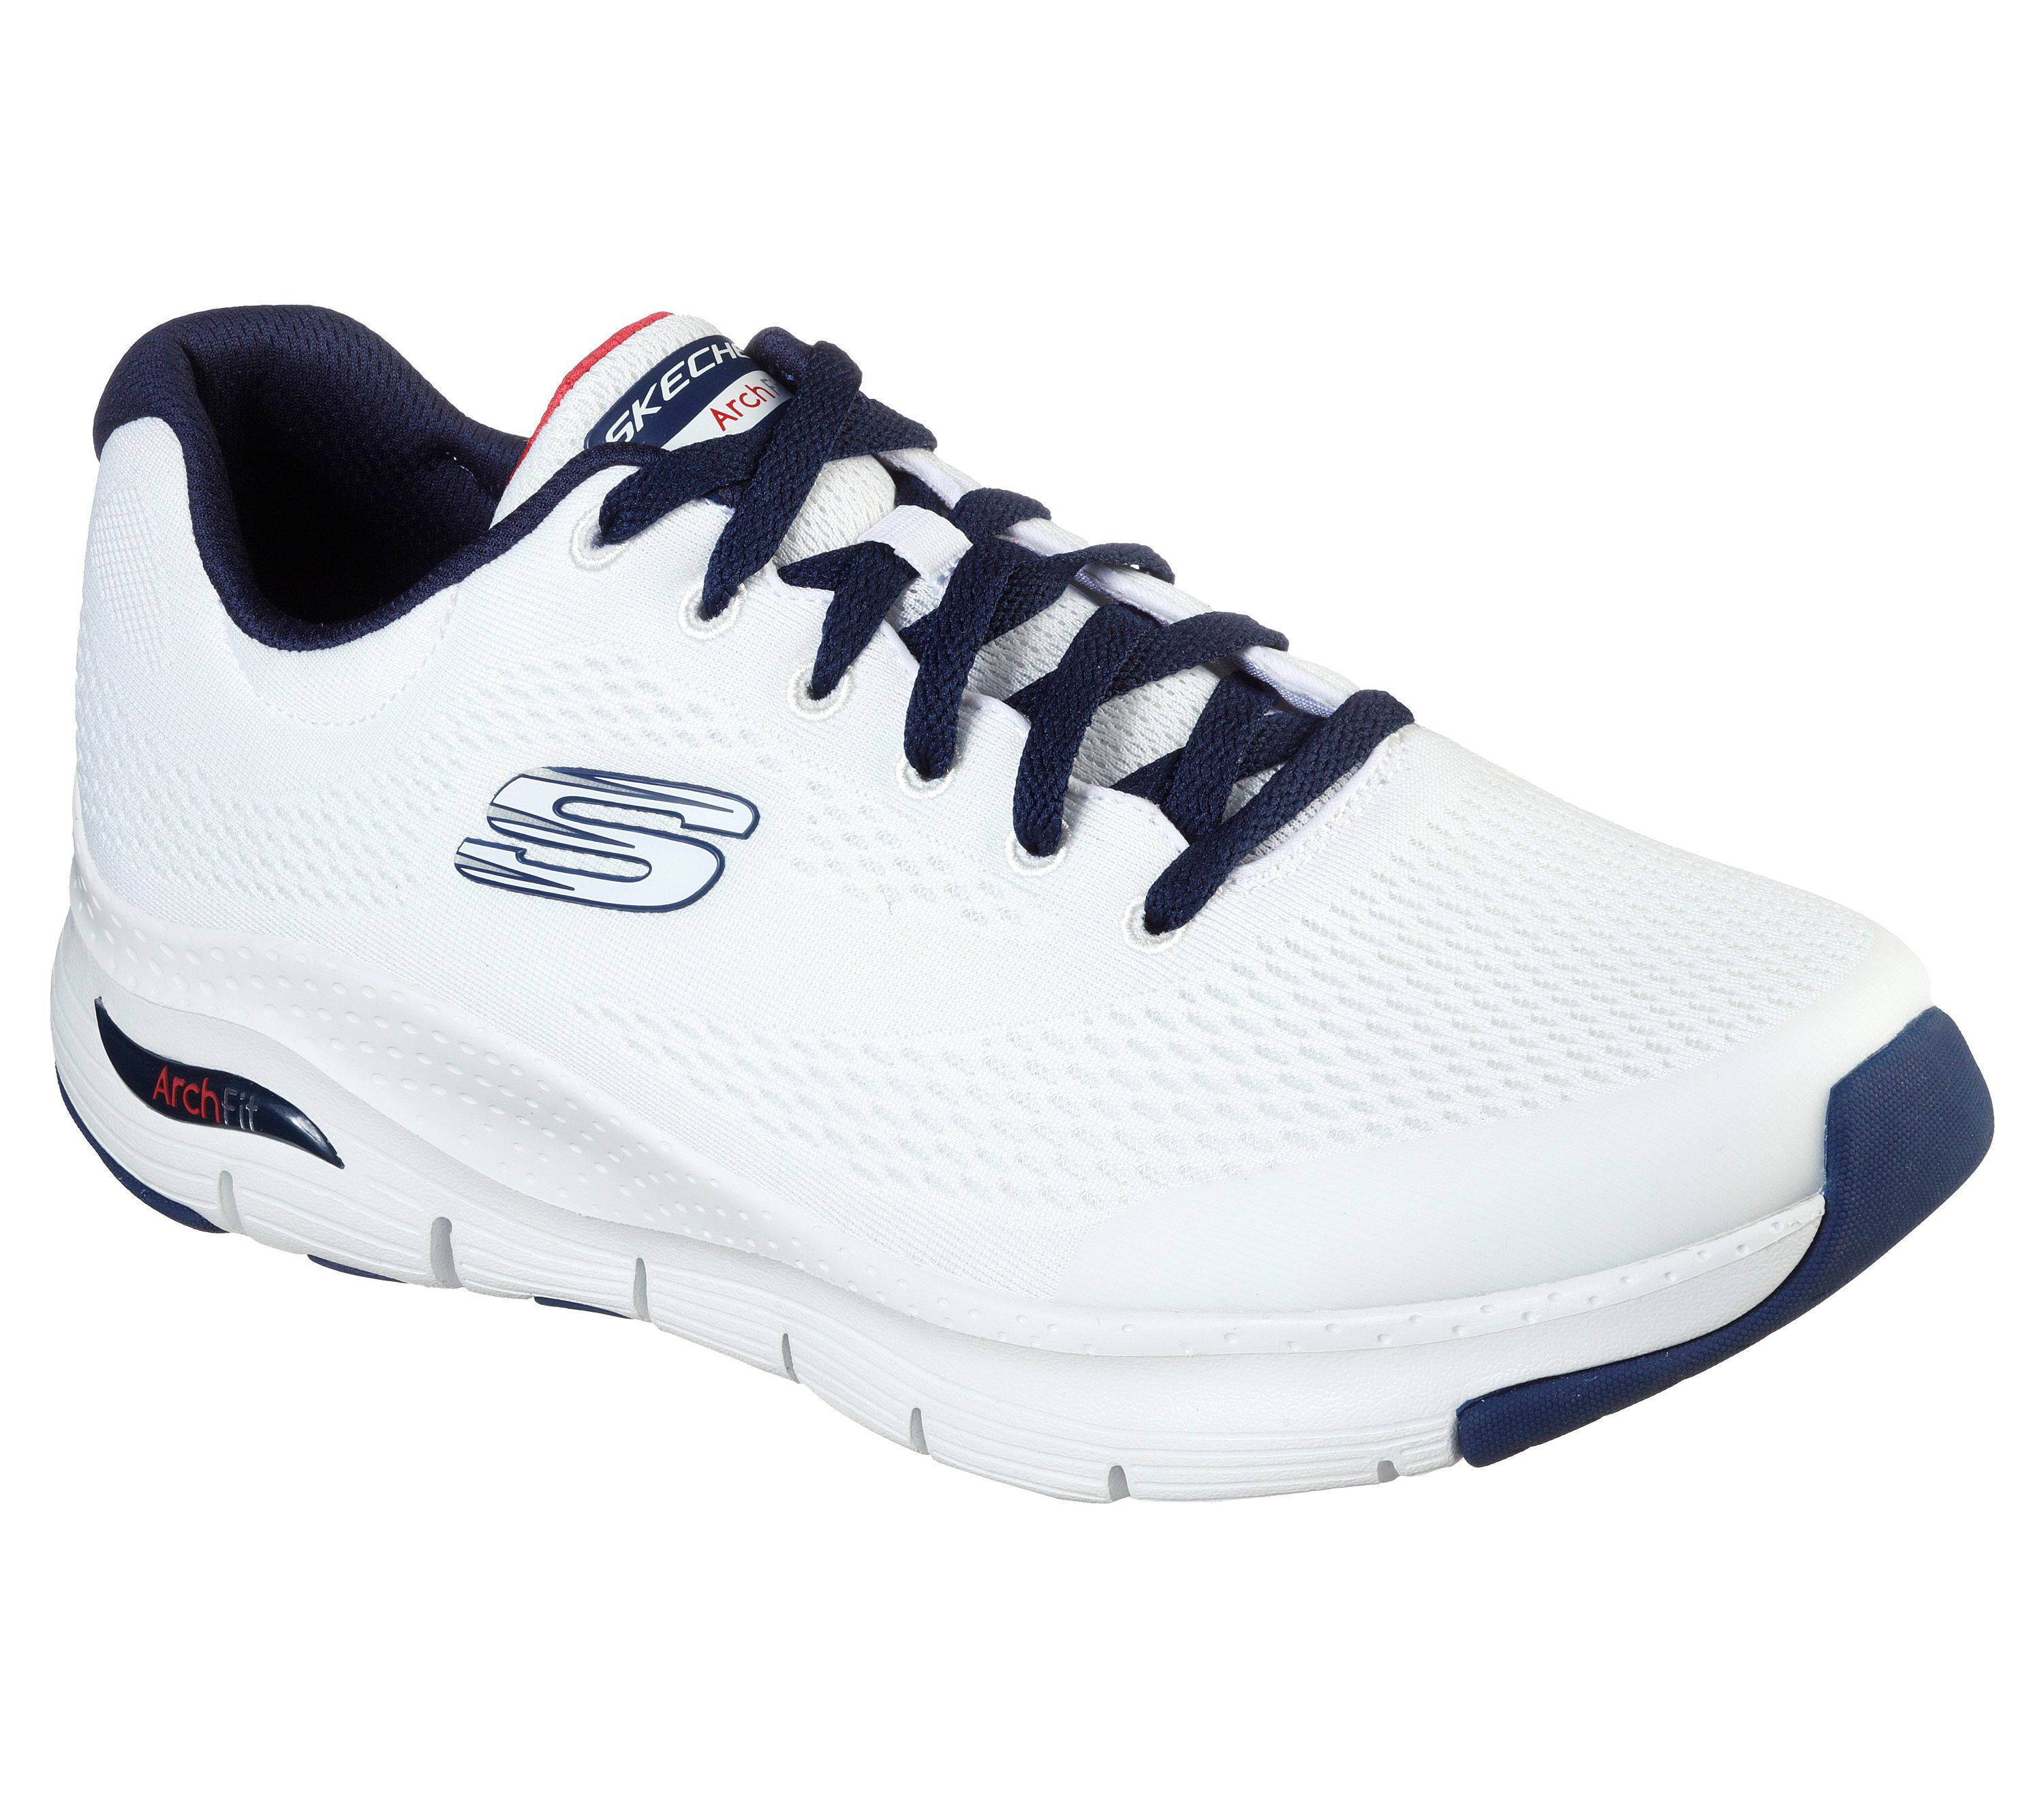 where can you buy skechers shoes